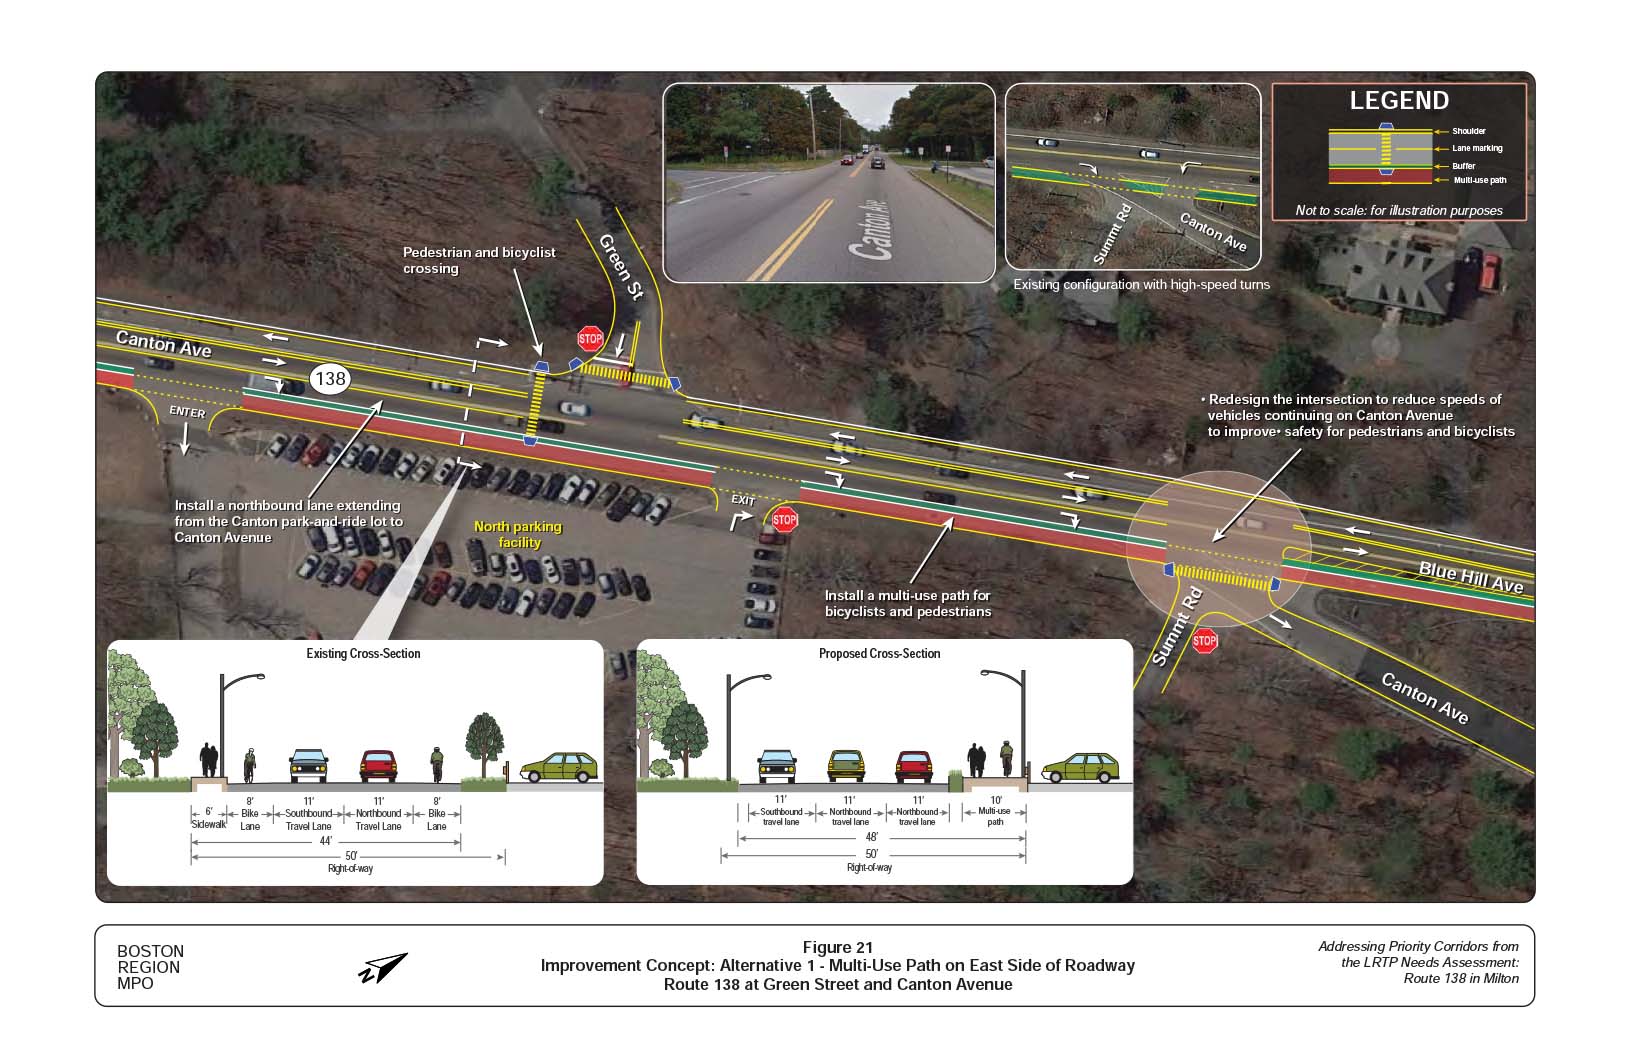 Figure 21 is an aerial photo of Route 138 at Green Street and Canton Avenue showing Alternative 1, a multi-use path on the east side of the roadway, and overlays showing the existing and proposed cross-sections.